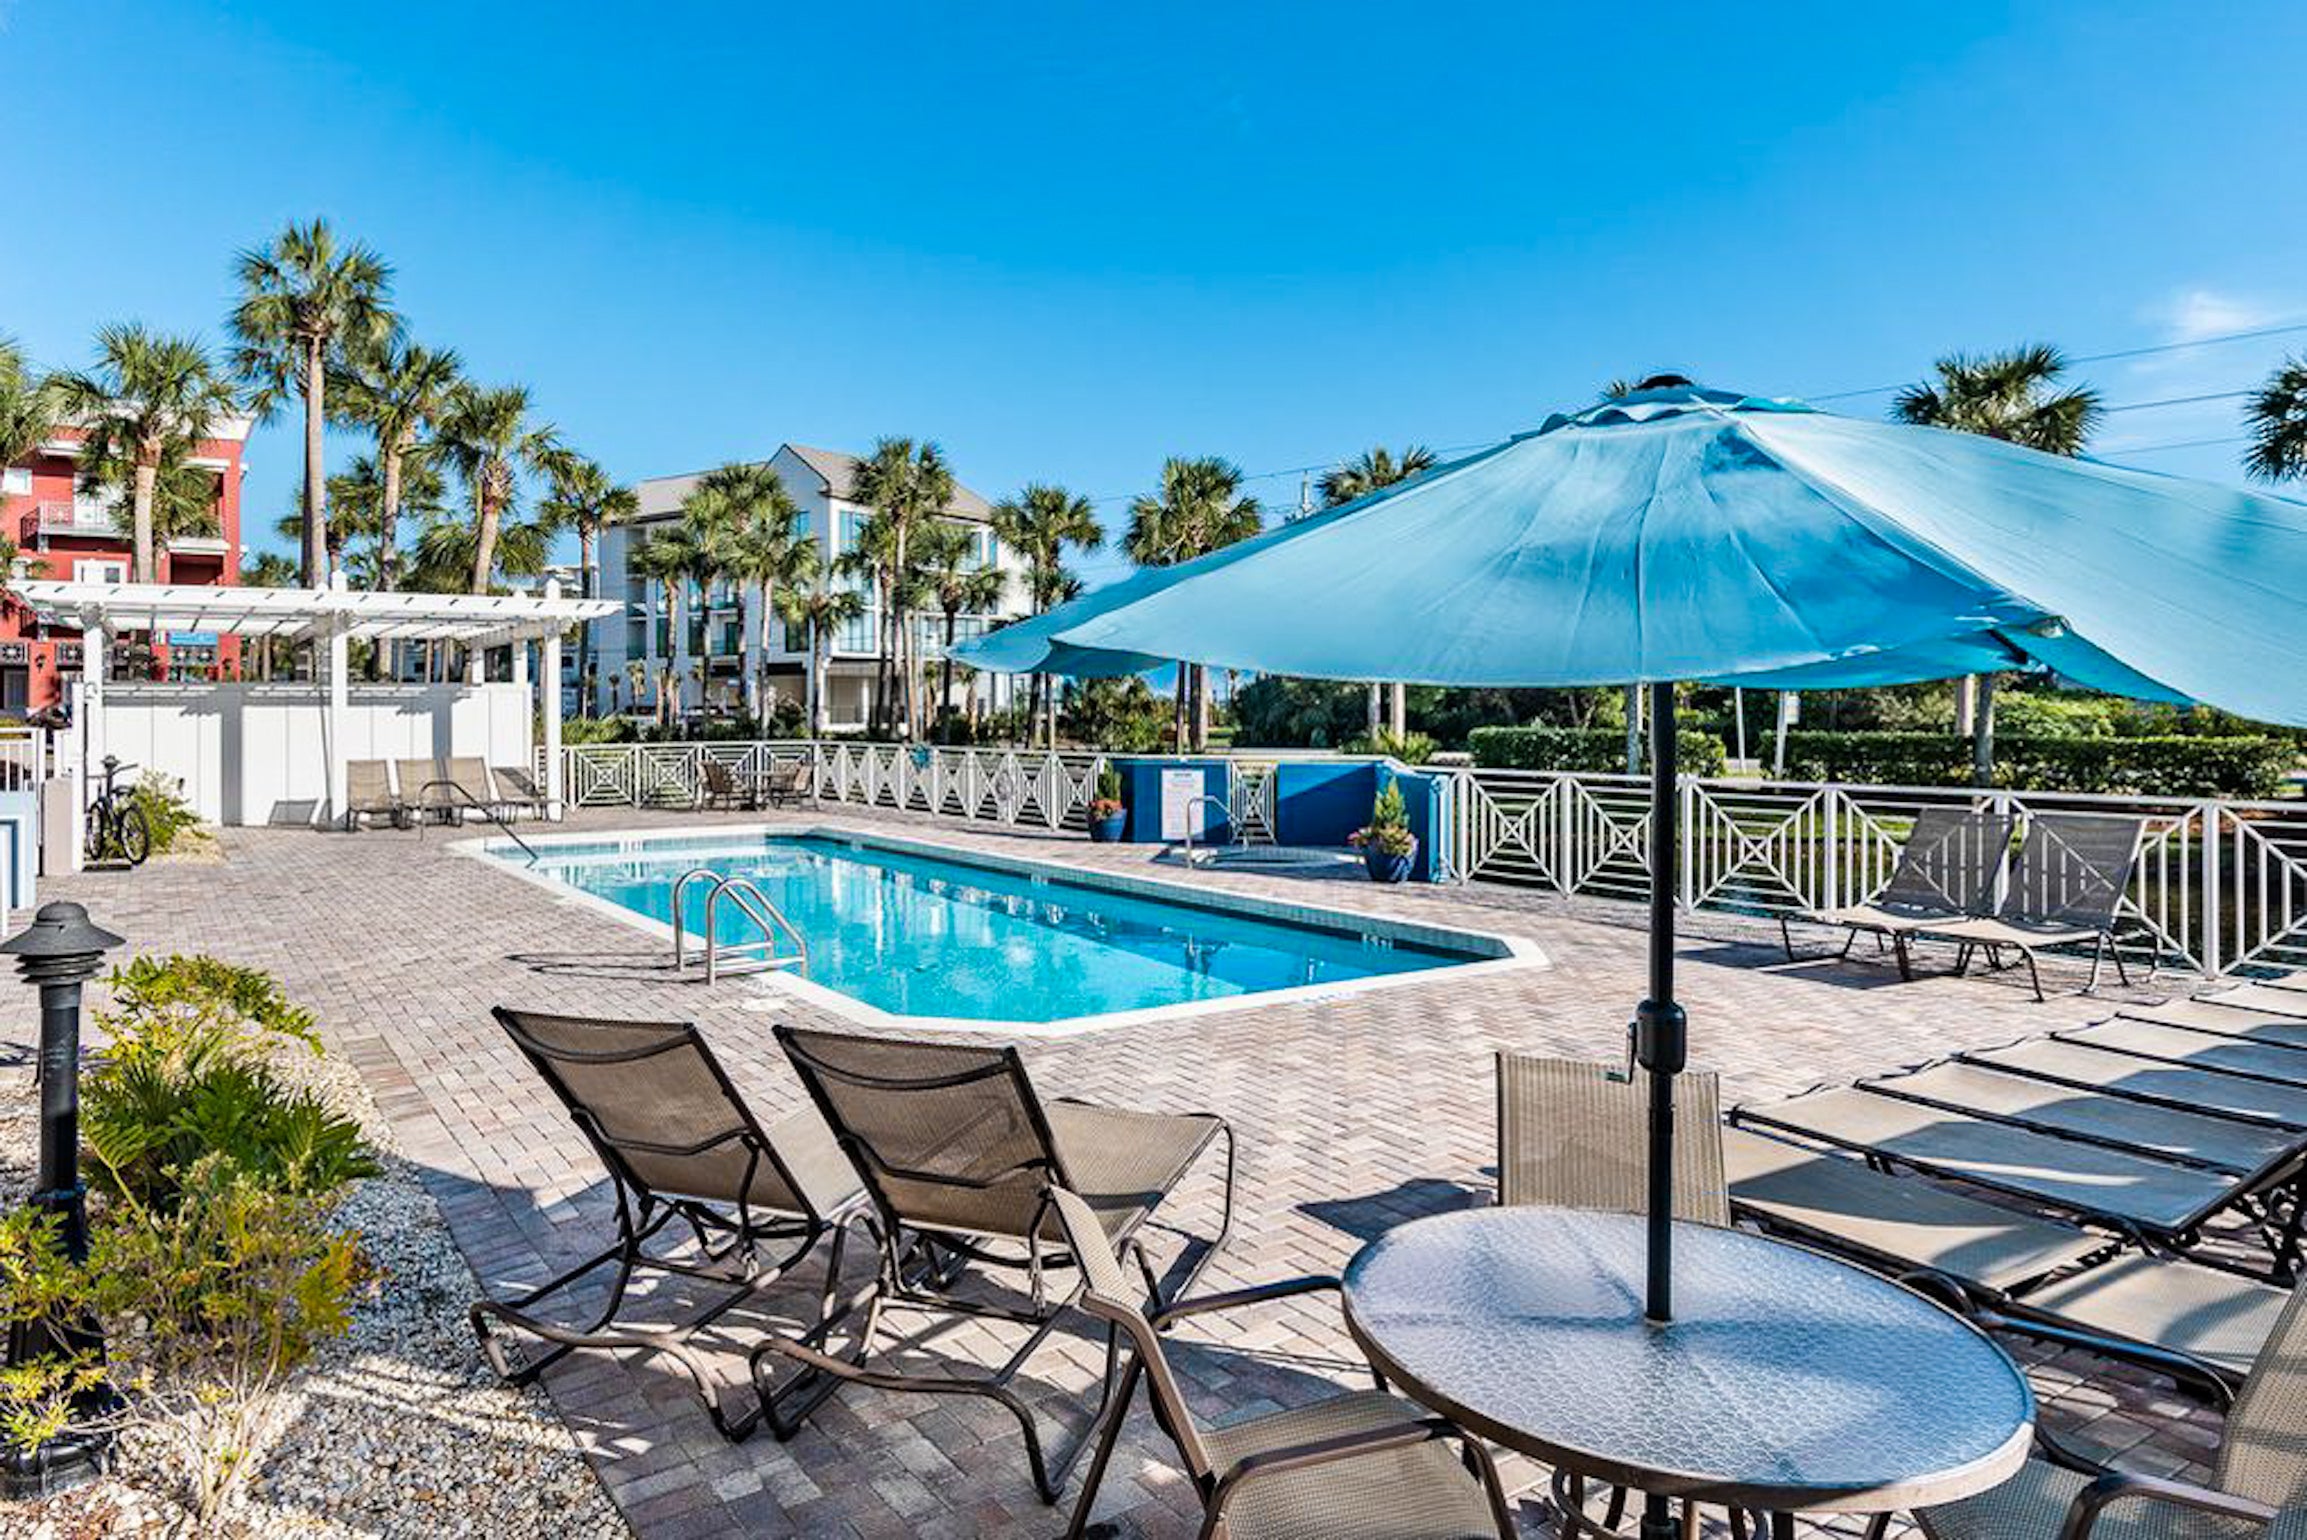 1 of 3 pools shared w/Gulf Place Cabanas